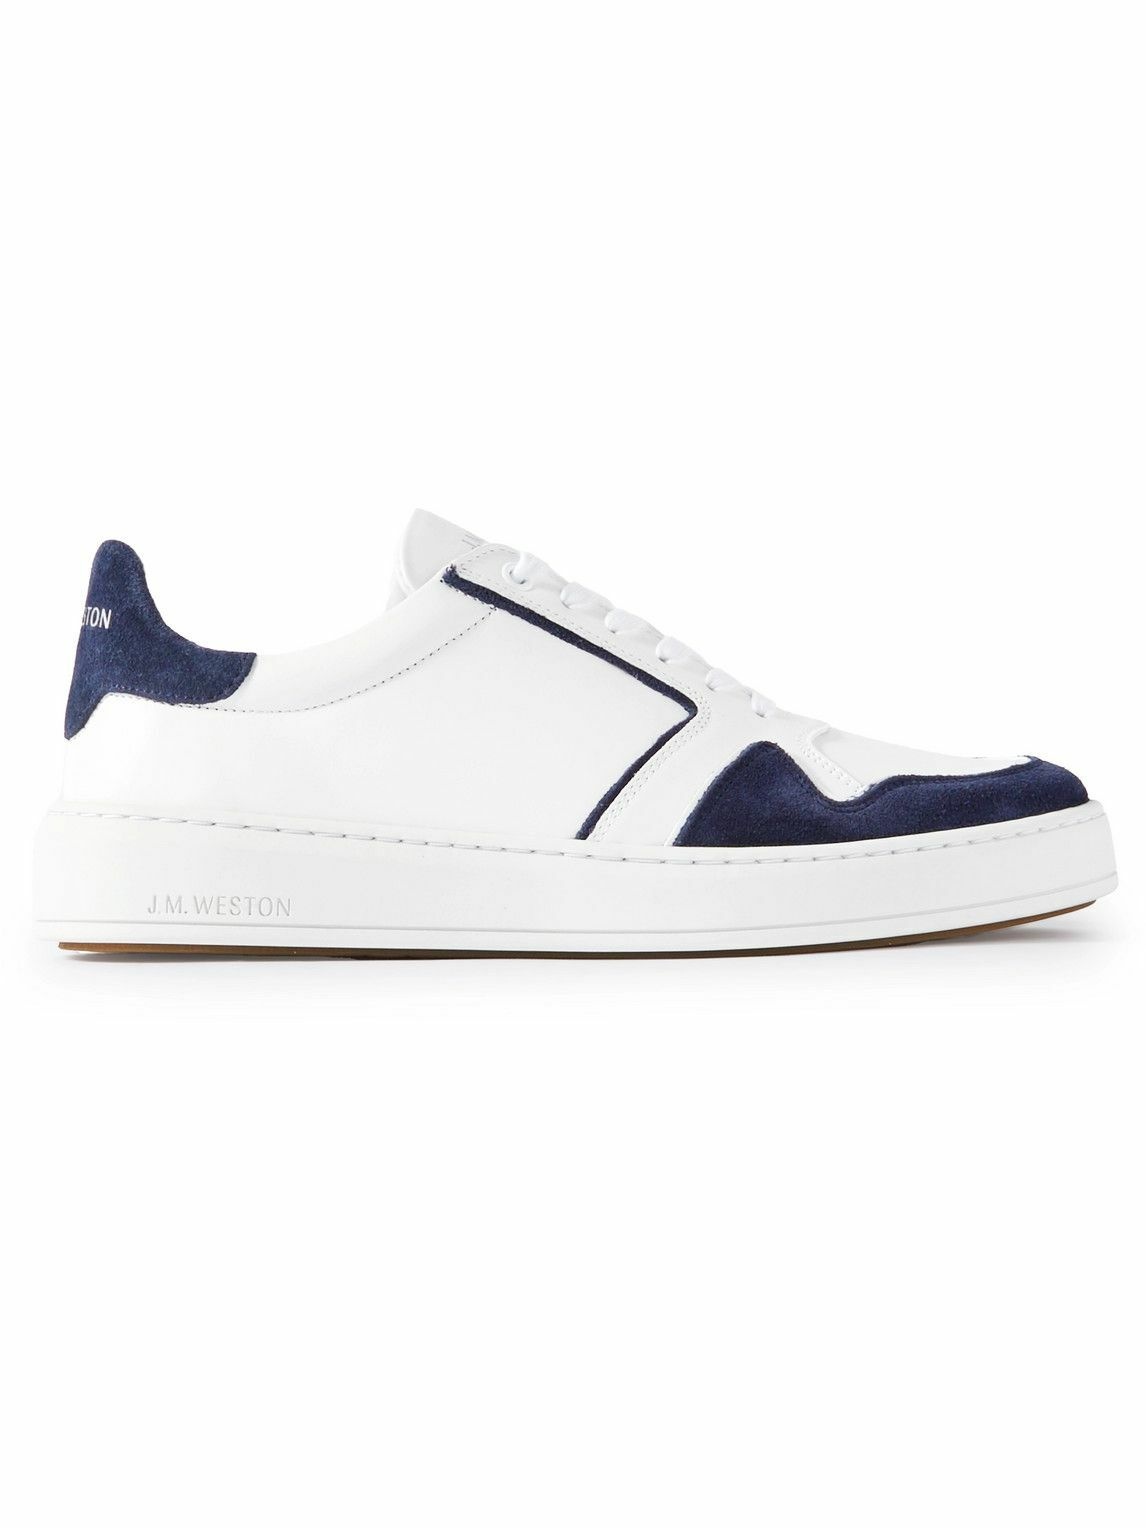 Photo: J.M. Weston - On Time Oxford Suede-Trimmed Leather Sneakers - Blue